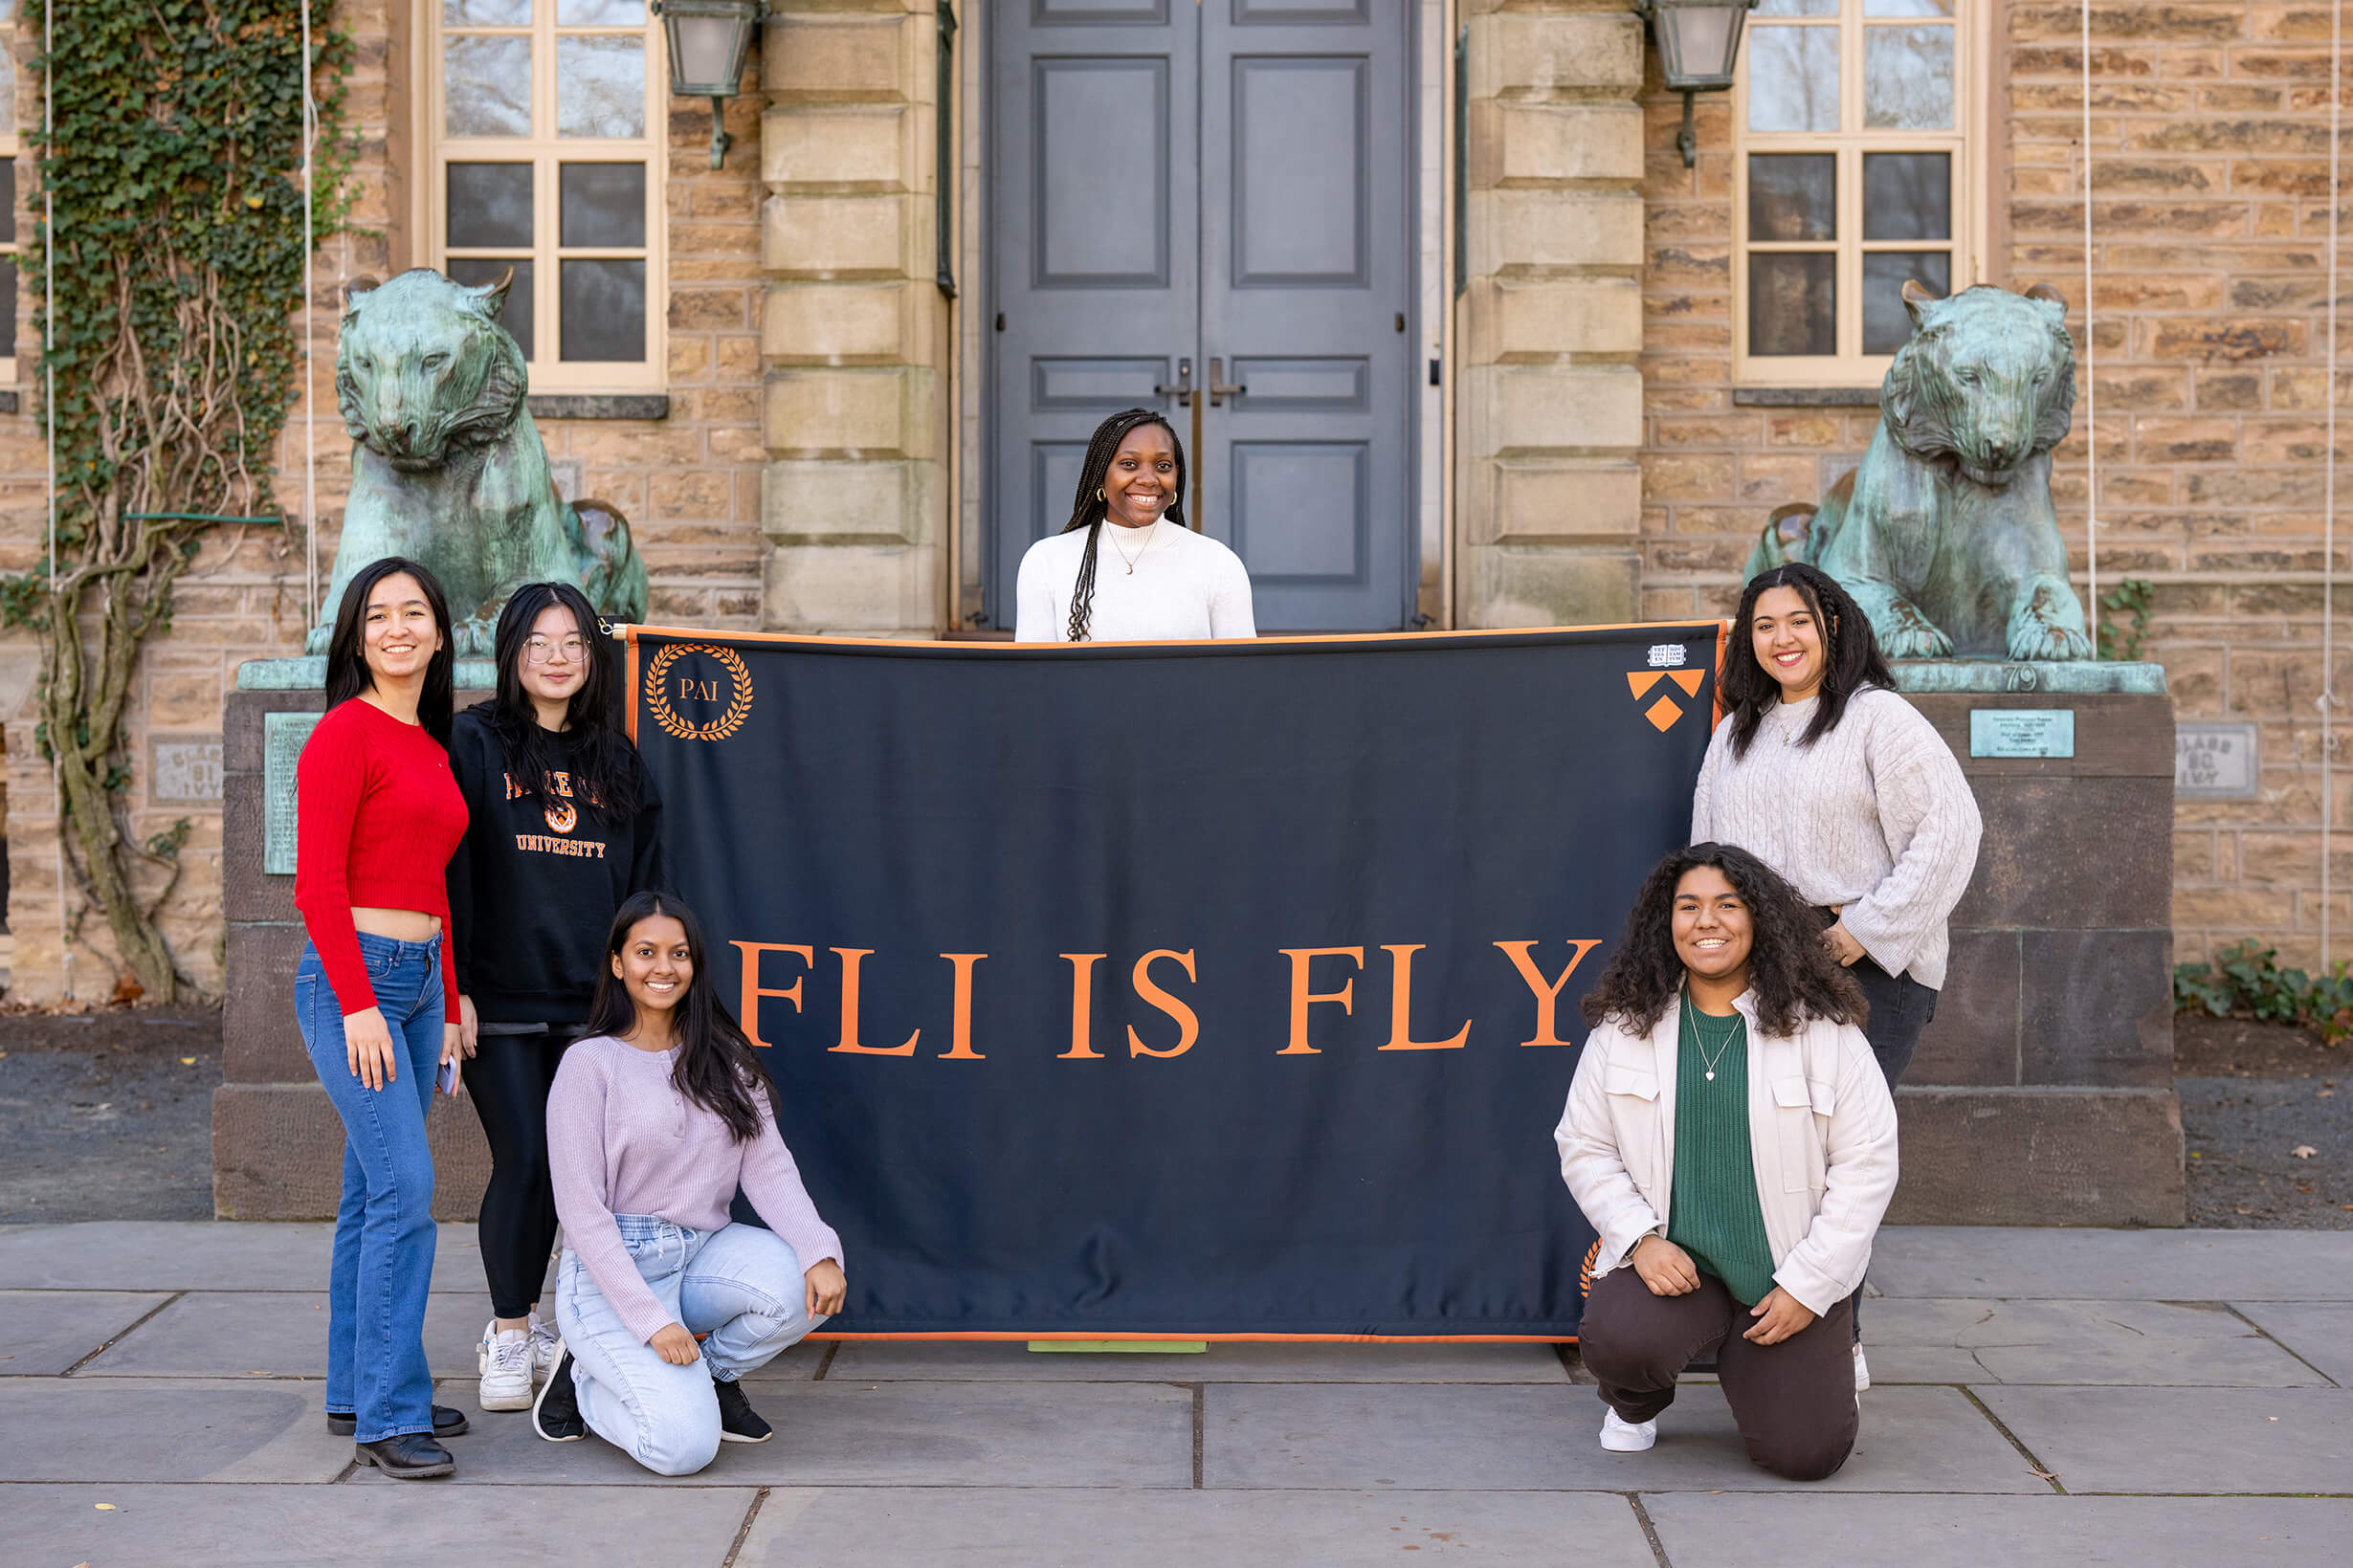 Students with FLI is FLY banner